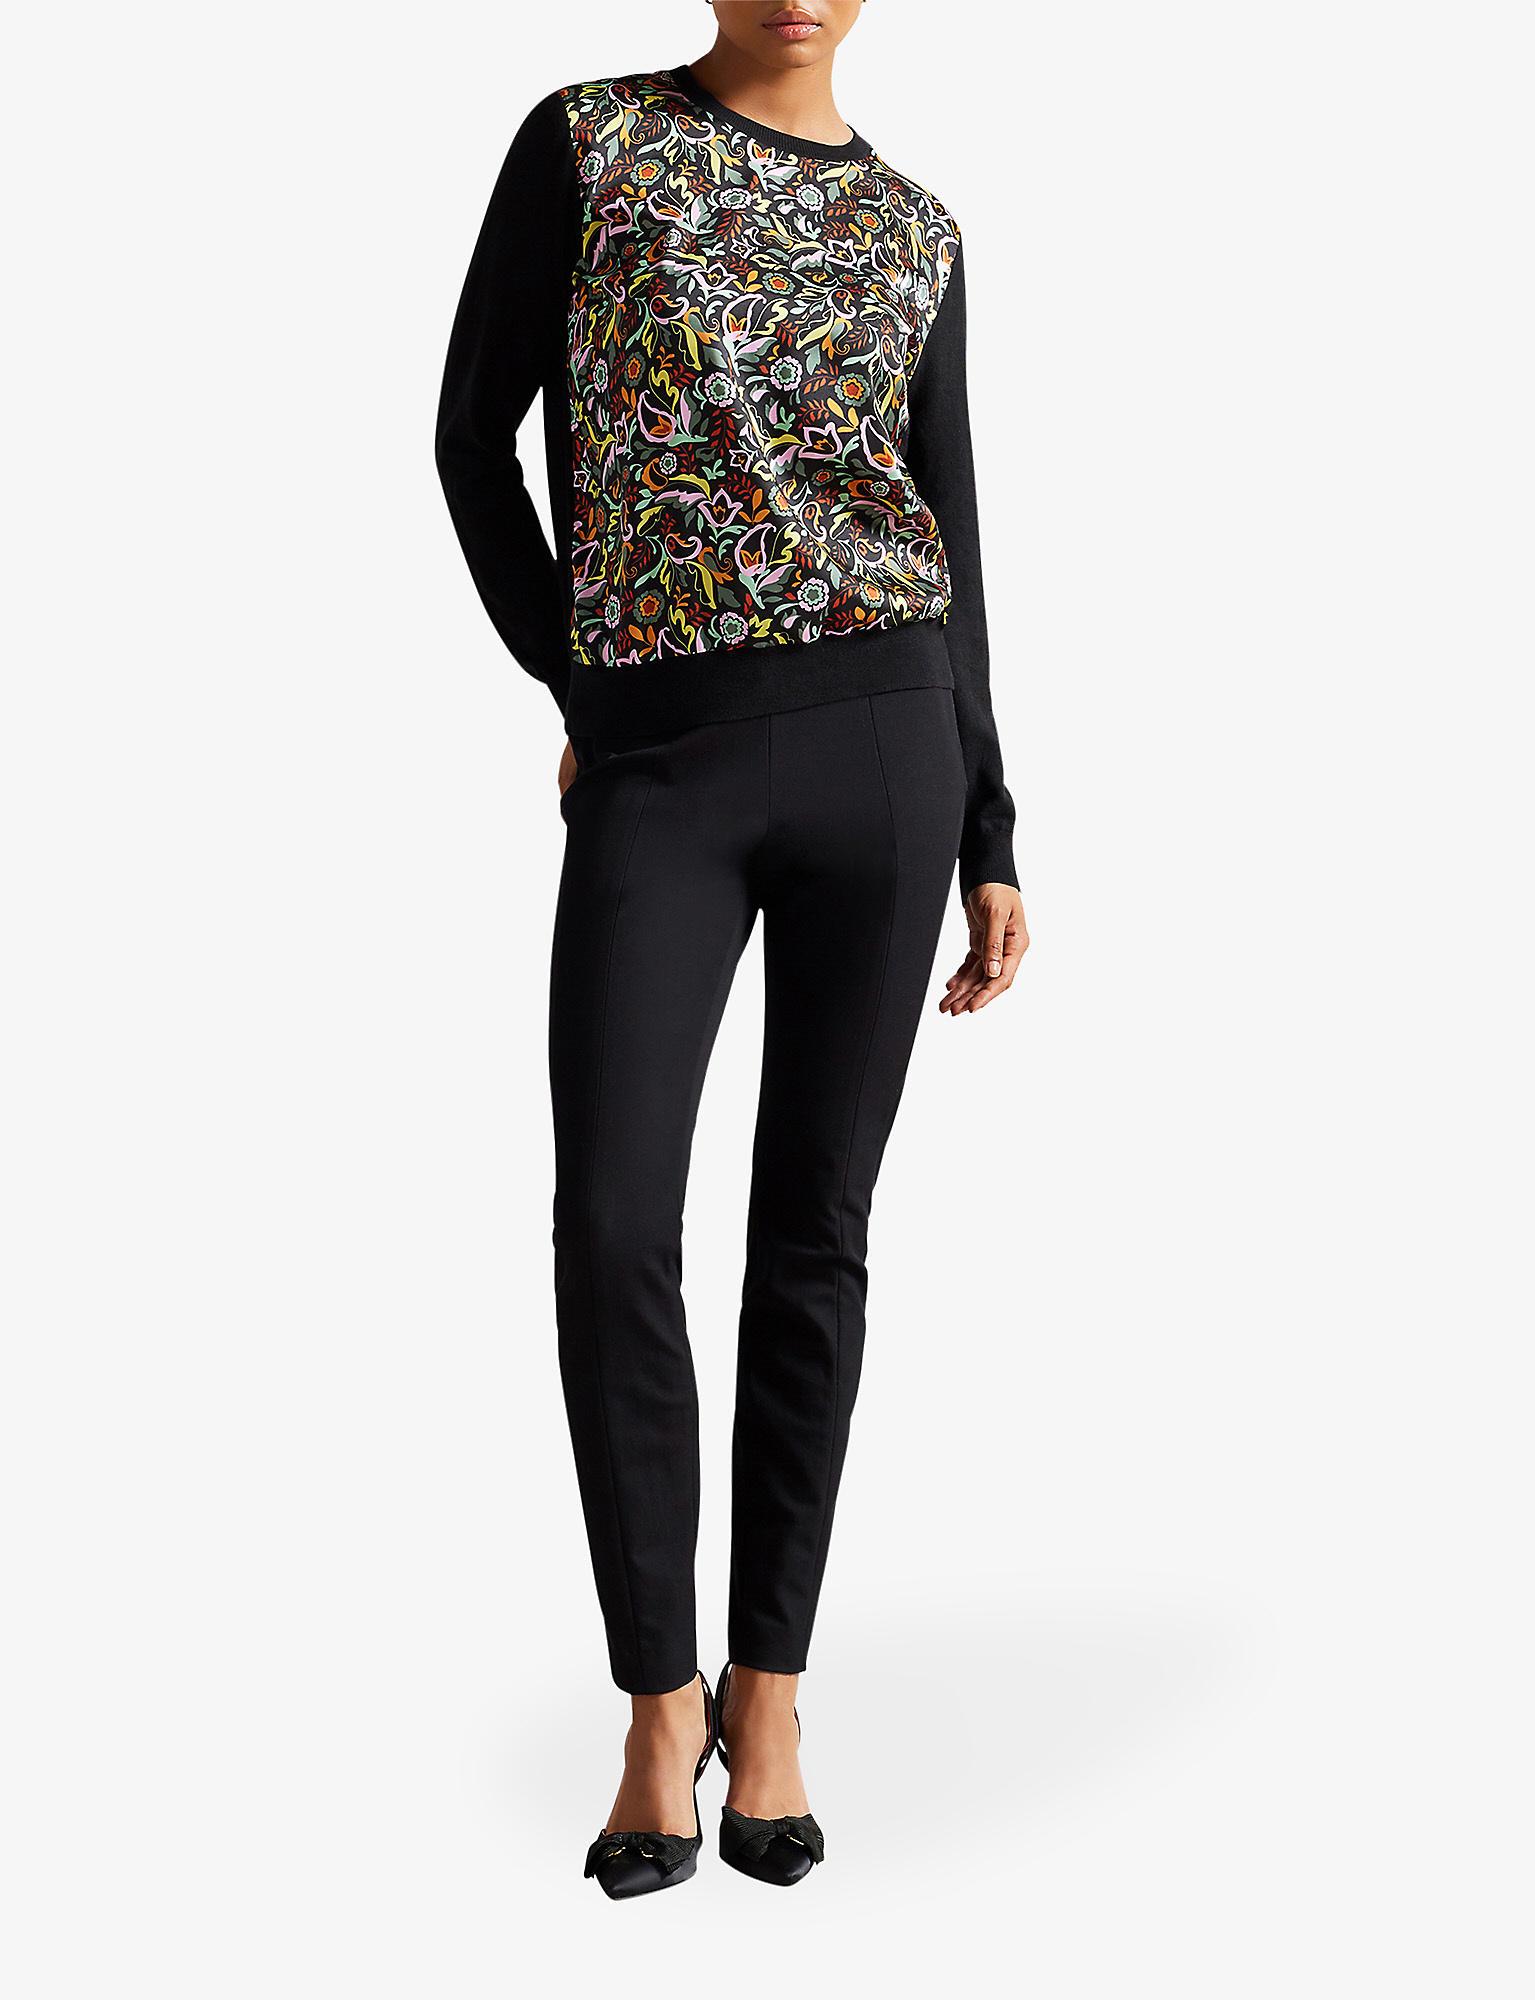 Ted Baker Ilaniah Floral-print Cotton-blend Woven Jumper in Black | Lyst